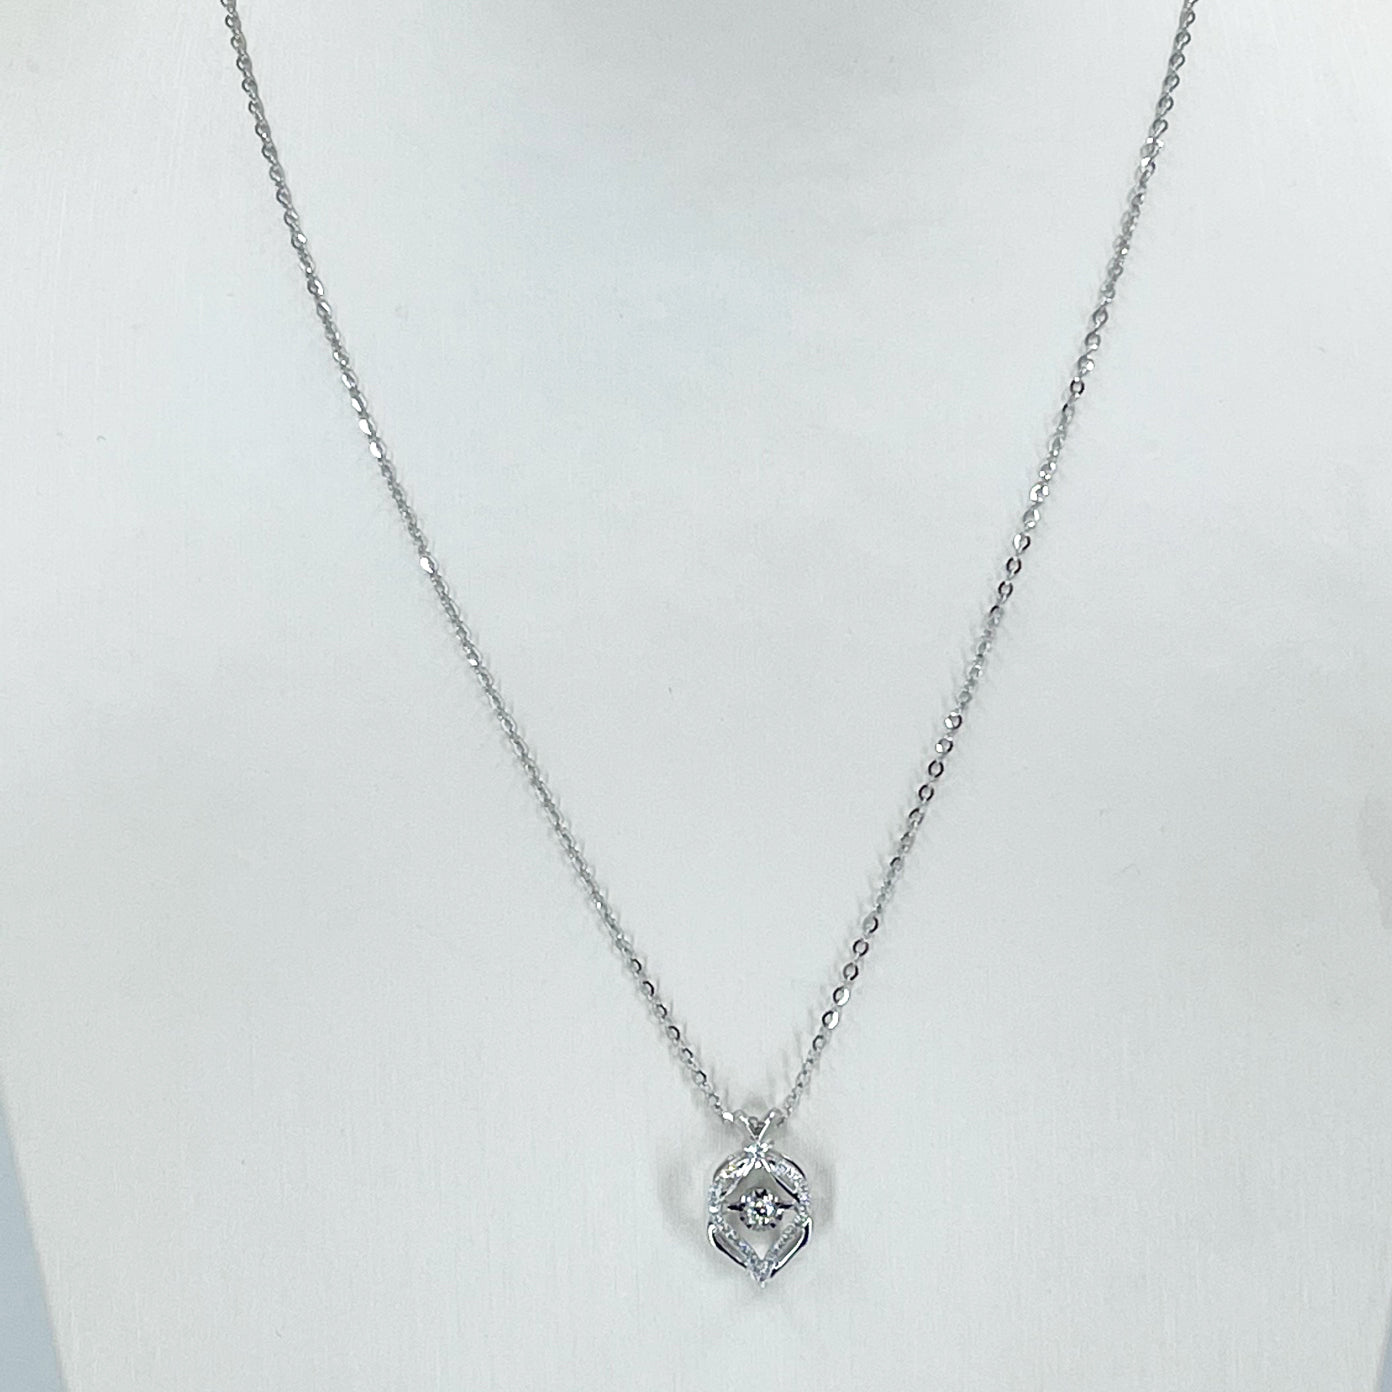 18K Solid White Gold Round Link Chain Necklace with Diamond Pendant 18